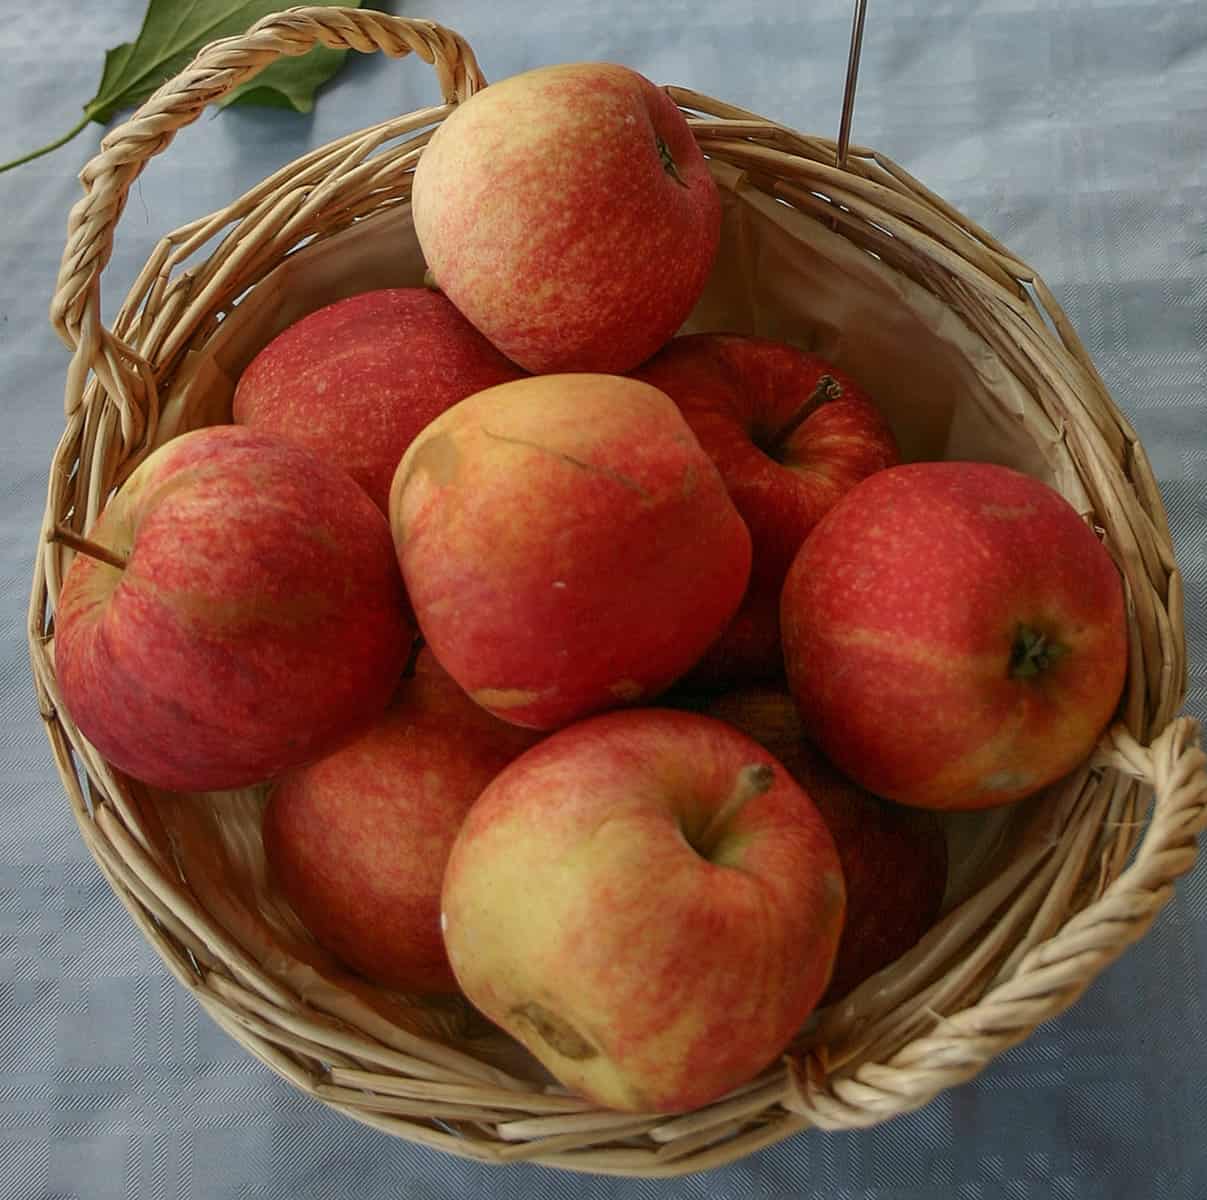 25 Different Apples You Should Know – Gala